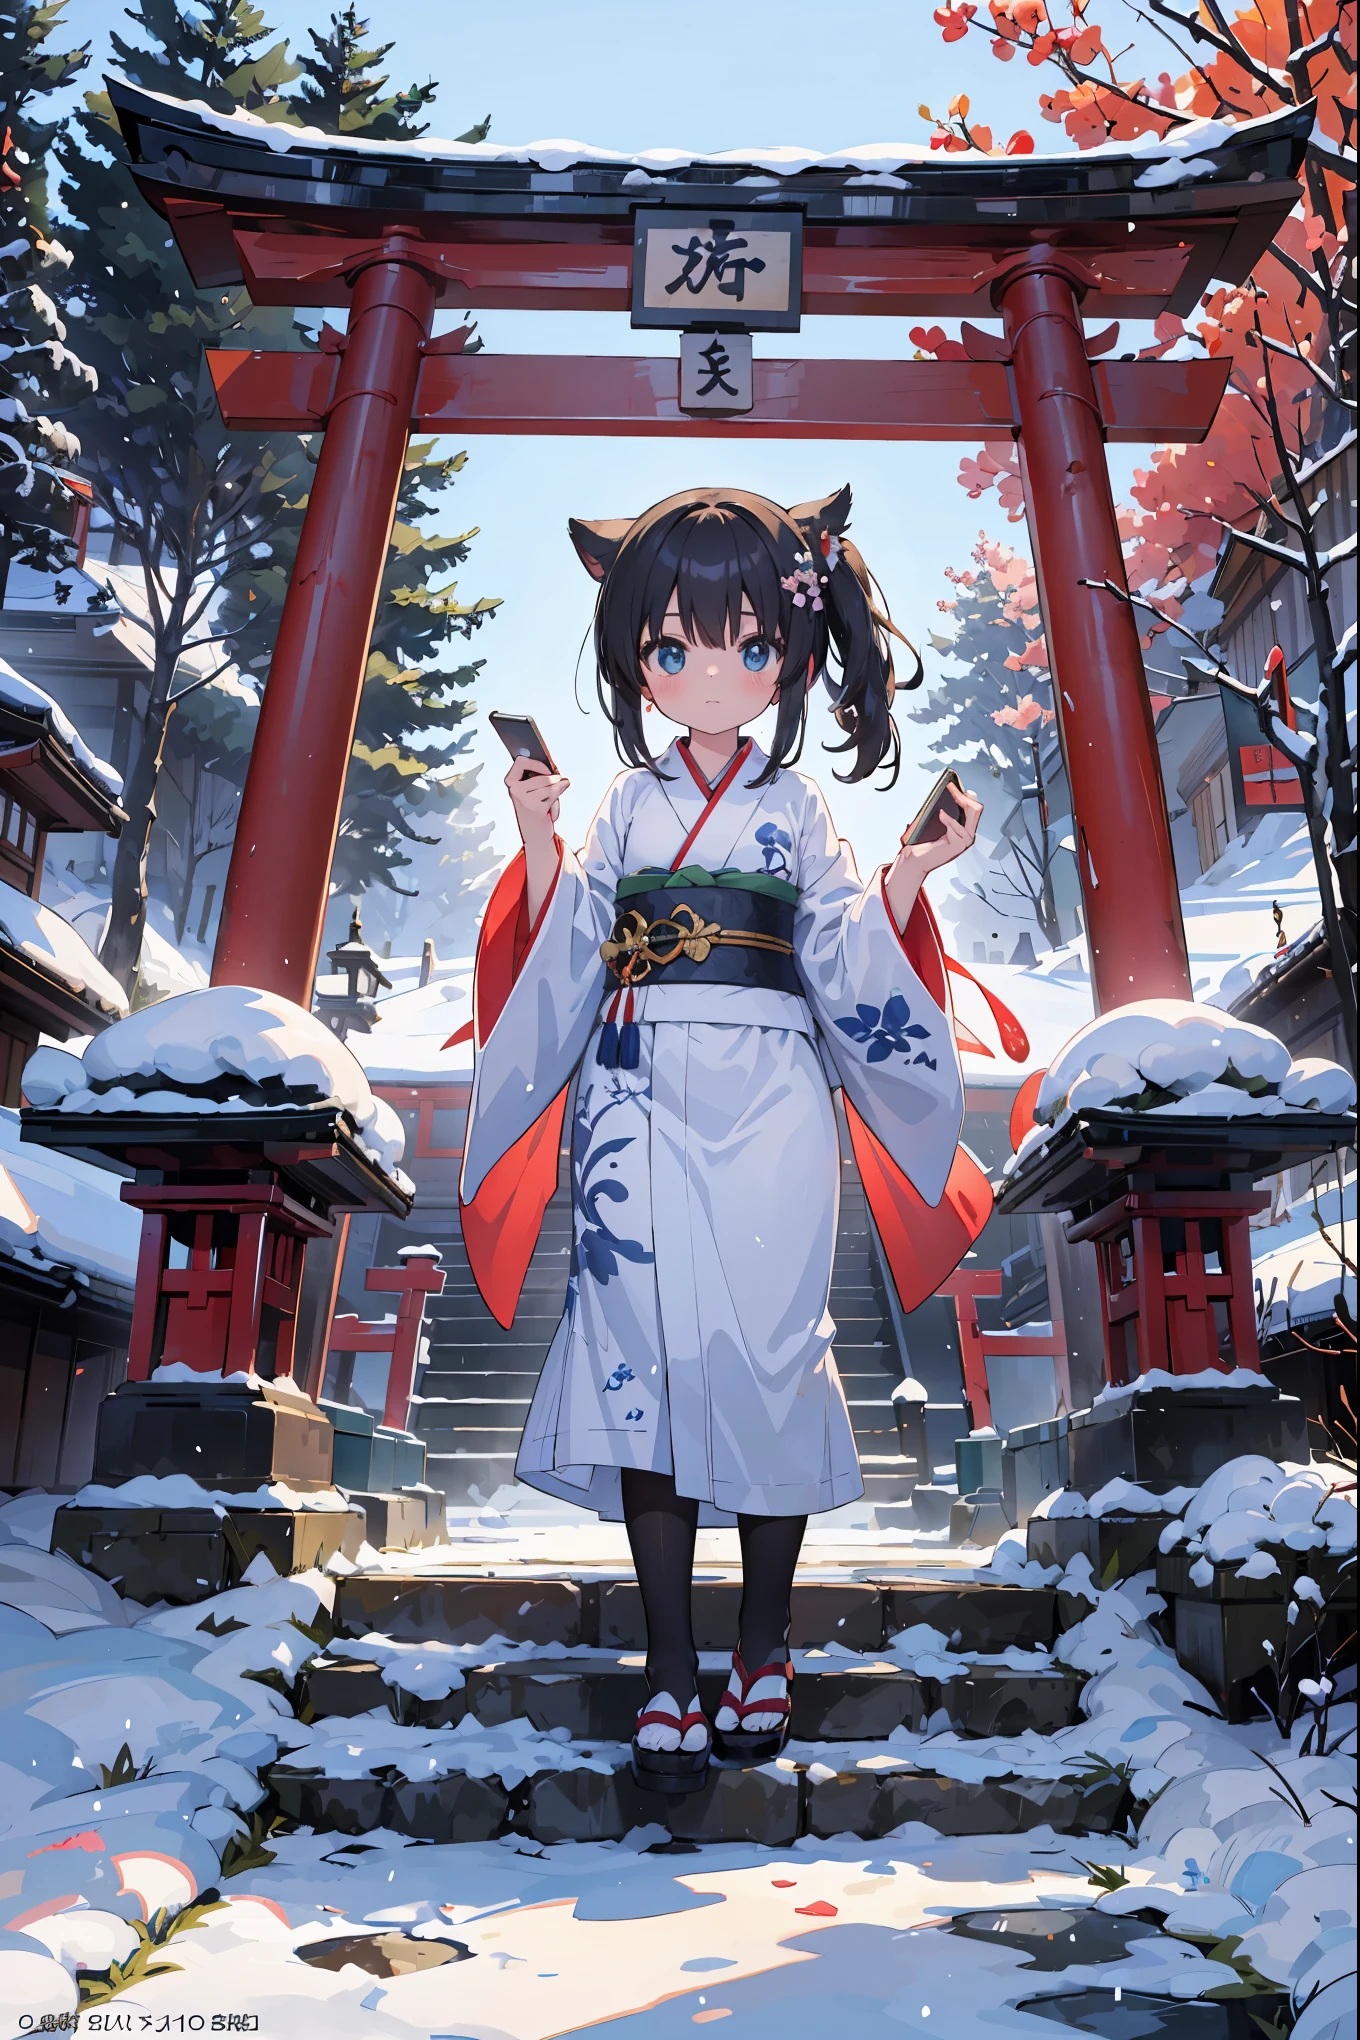 absurd, absolute resolution, incredibly absurd, super high quality, super detailed, official art, unity 8k wall, masterpiece
BREAK
Subject: First visit to a shrine
Subtitle: Tatsumi-chan (anthropomorphic chibi character), chibi, cute, Meiji Shrine

BREAK
"On a New Year's first visit to the shrine, an anthropomorphic chibi  named Tatsumi-chan is wearing a gorgeous kimono with the torii gate of the Meiji Shrine in the background with a flurry of snow. She is wearing a sash with dragon elements, representing the Chinese zodiac sign for the year of the dragon, and holds a small ema (votive tablet) in her hand, ready to write her wishes for the New Year. In the background, the precisely painted precincts of the shrine are decorated with light, and trees covered with fresh snow and stone lanterns create an ethereal atmosphere. Tatsumi-chan has sparkling eyes that symbolize hope for the New Year, and her cute pose brightens the hearts of all who see her."